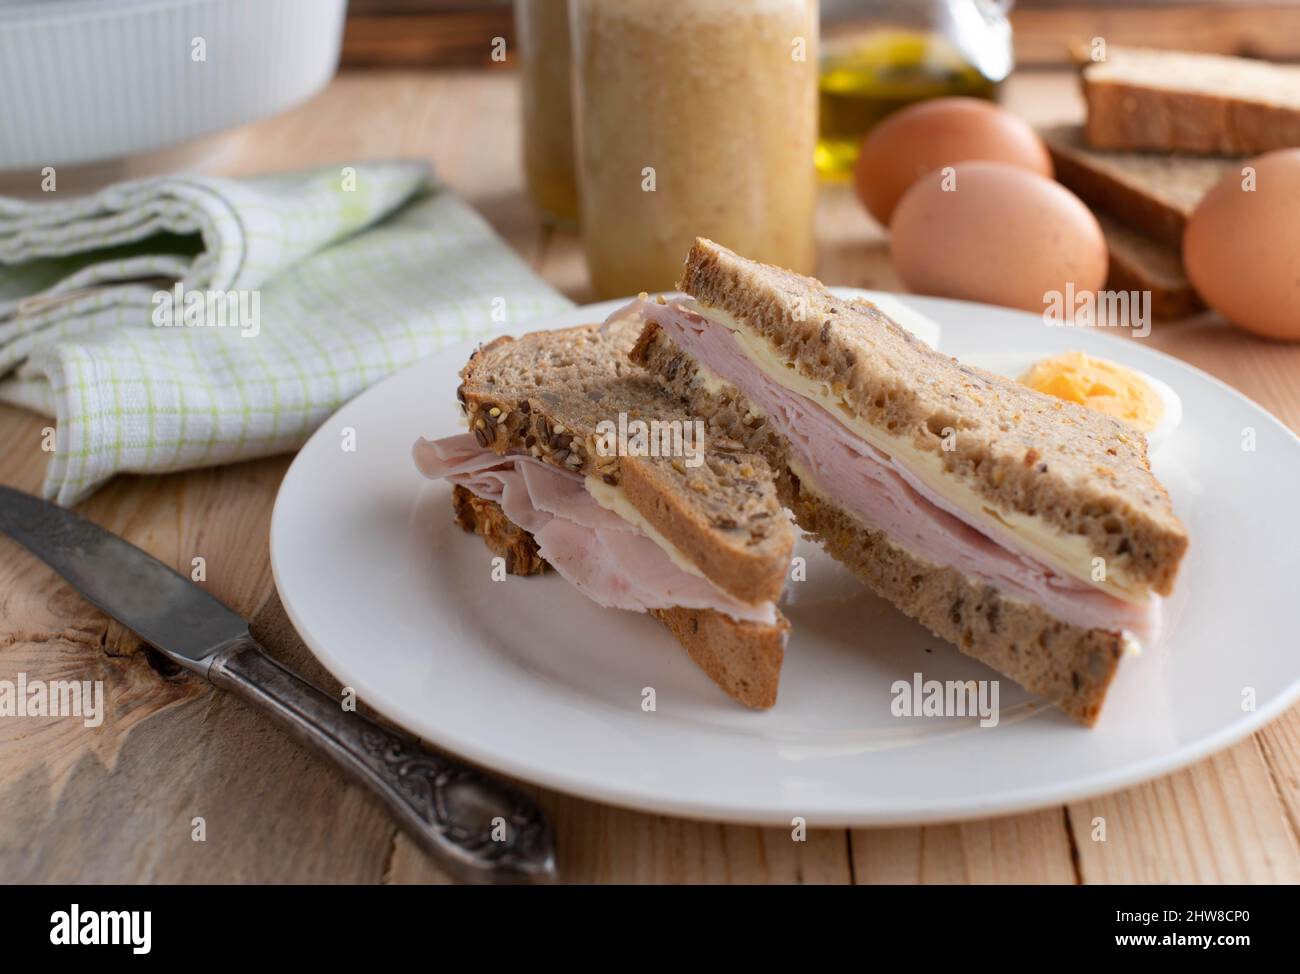 Homemade breakfast sandwich with butter, ham and cheese. Served on multigrain bread Stock Photo